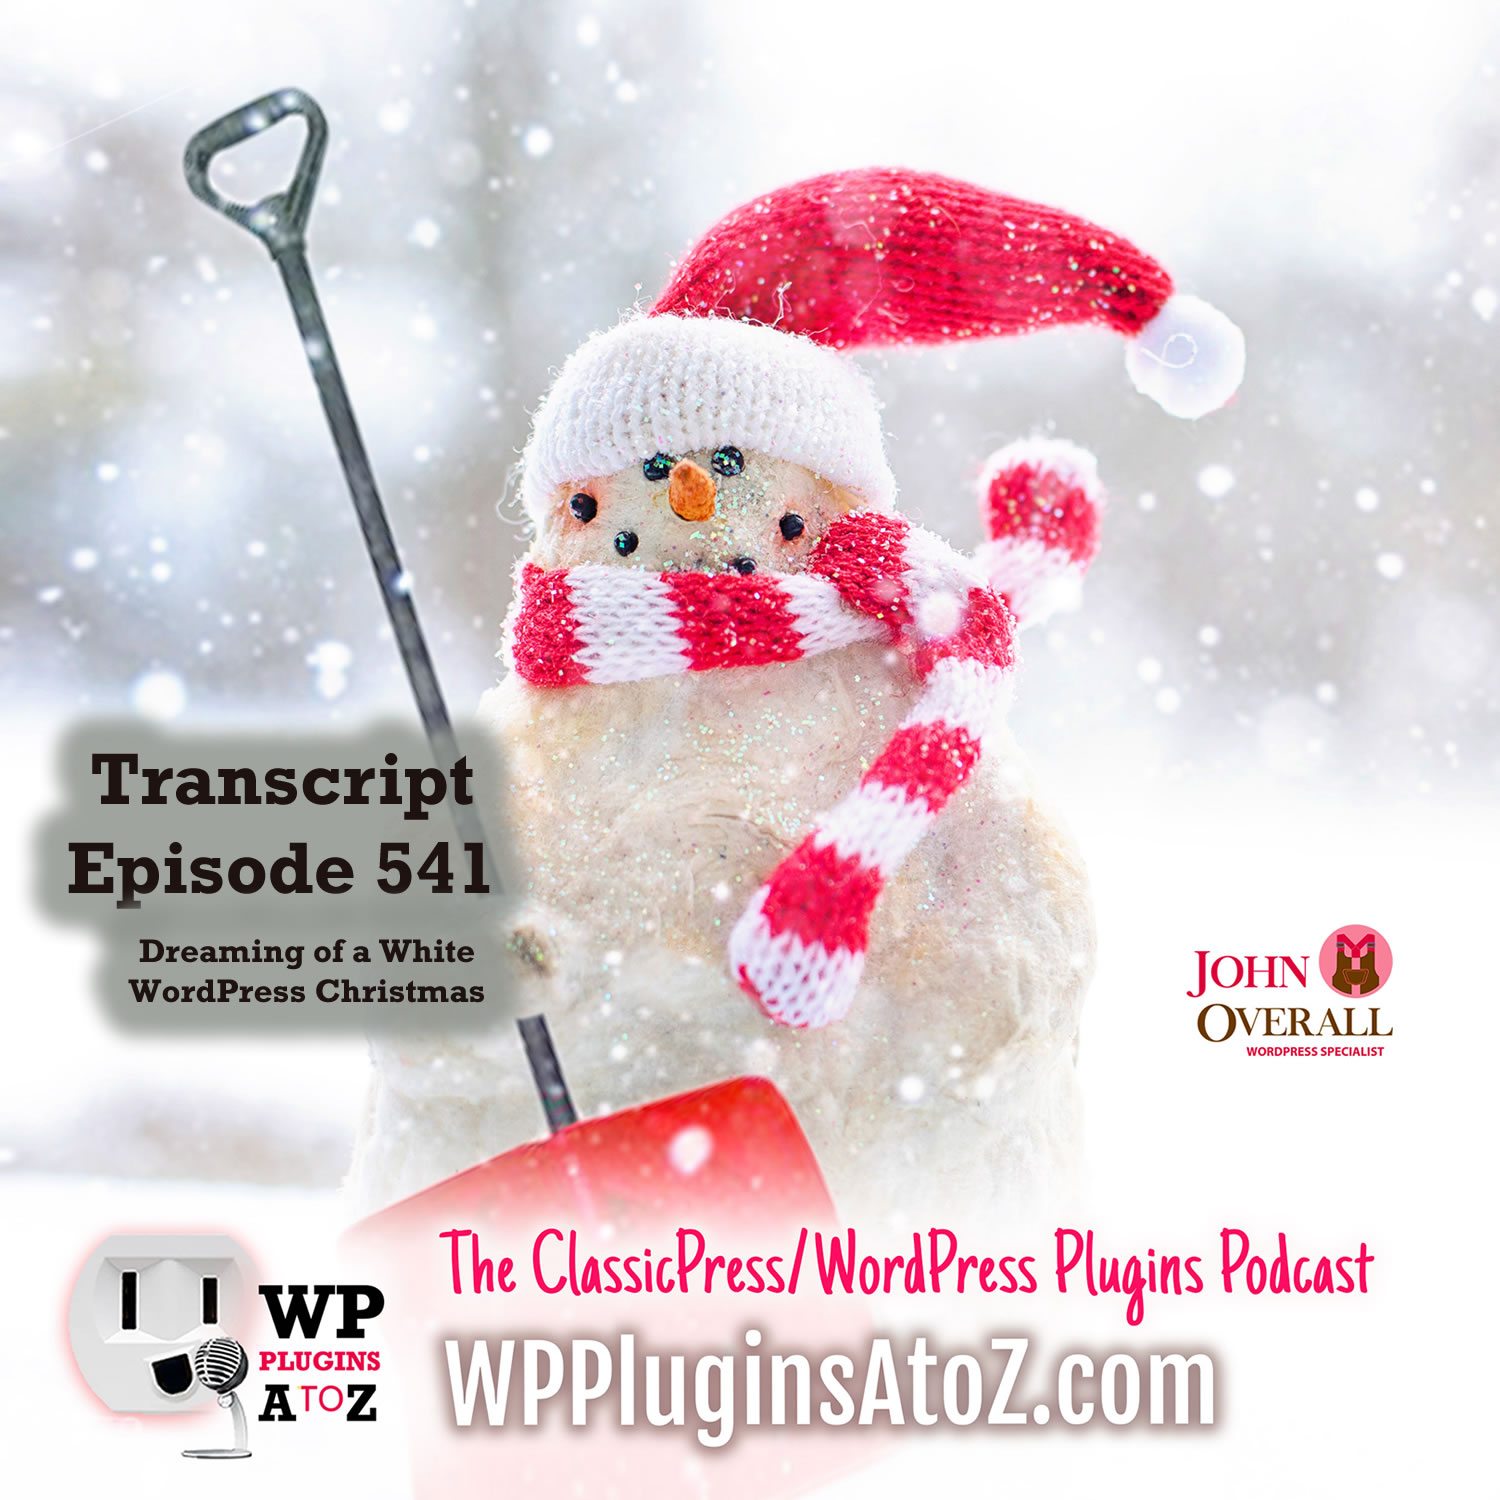 Transcript for Episode 541 and we have plugins for Shopping Carts, Dark Mode, Child Themes, Free Downloads, Page Links, No Nonsense... and ClassicPress Options. It's all coming up on WordPress Plugins A-Z!